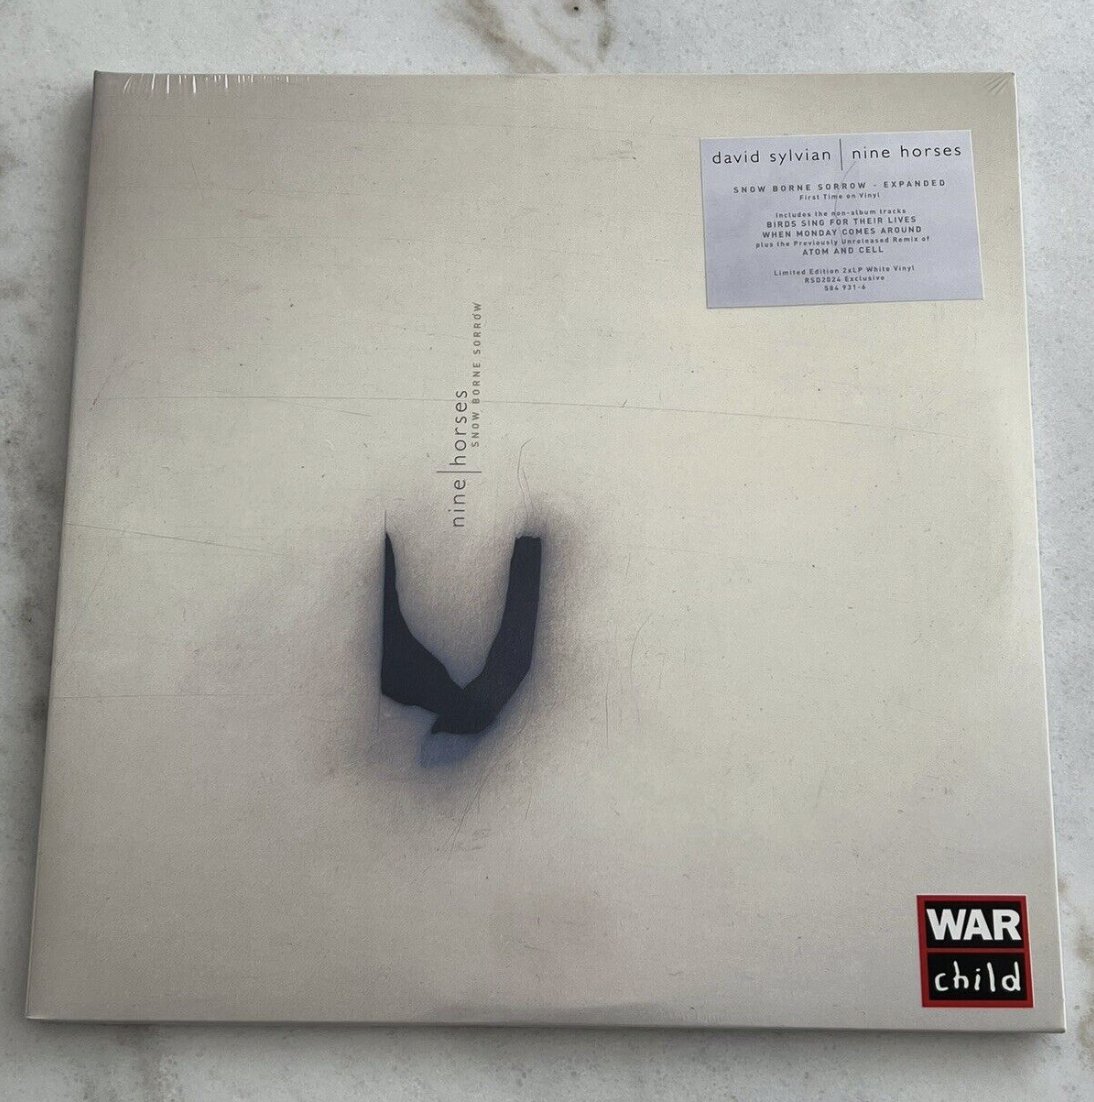 #NowStreaming Nine Horses Snow Borne Sorrow 2005 Happily listening to a hi-res stream of this amazing album and wondering why someone would pay £100 on ebay for this one shown here. Its a digital remaster pressed at GZ after all...